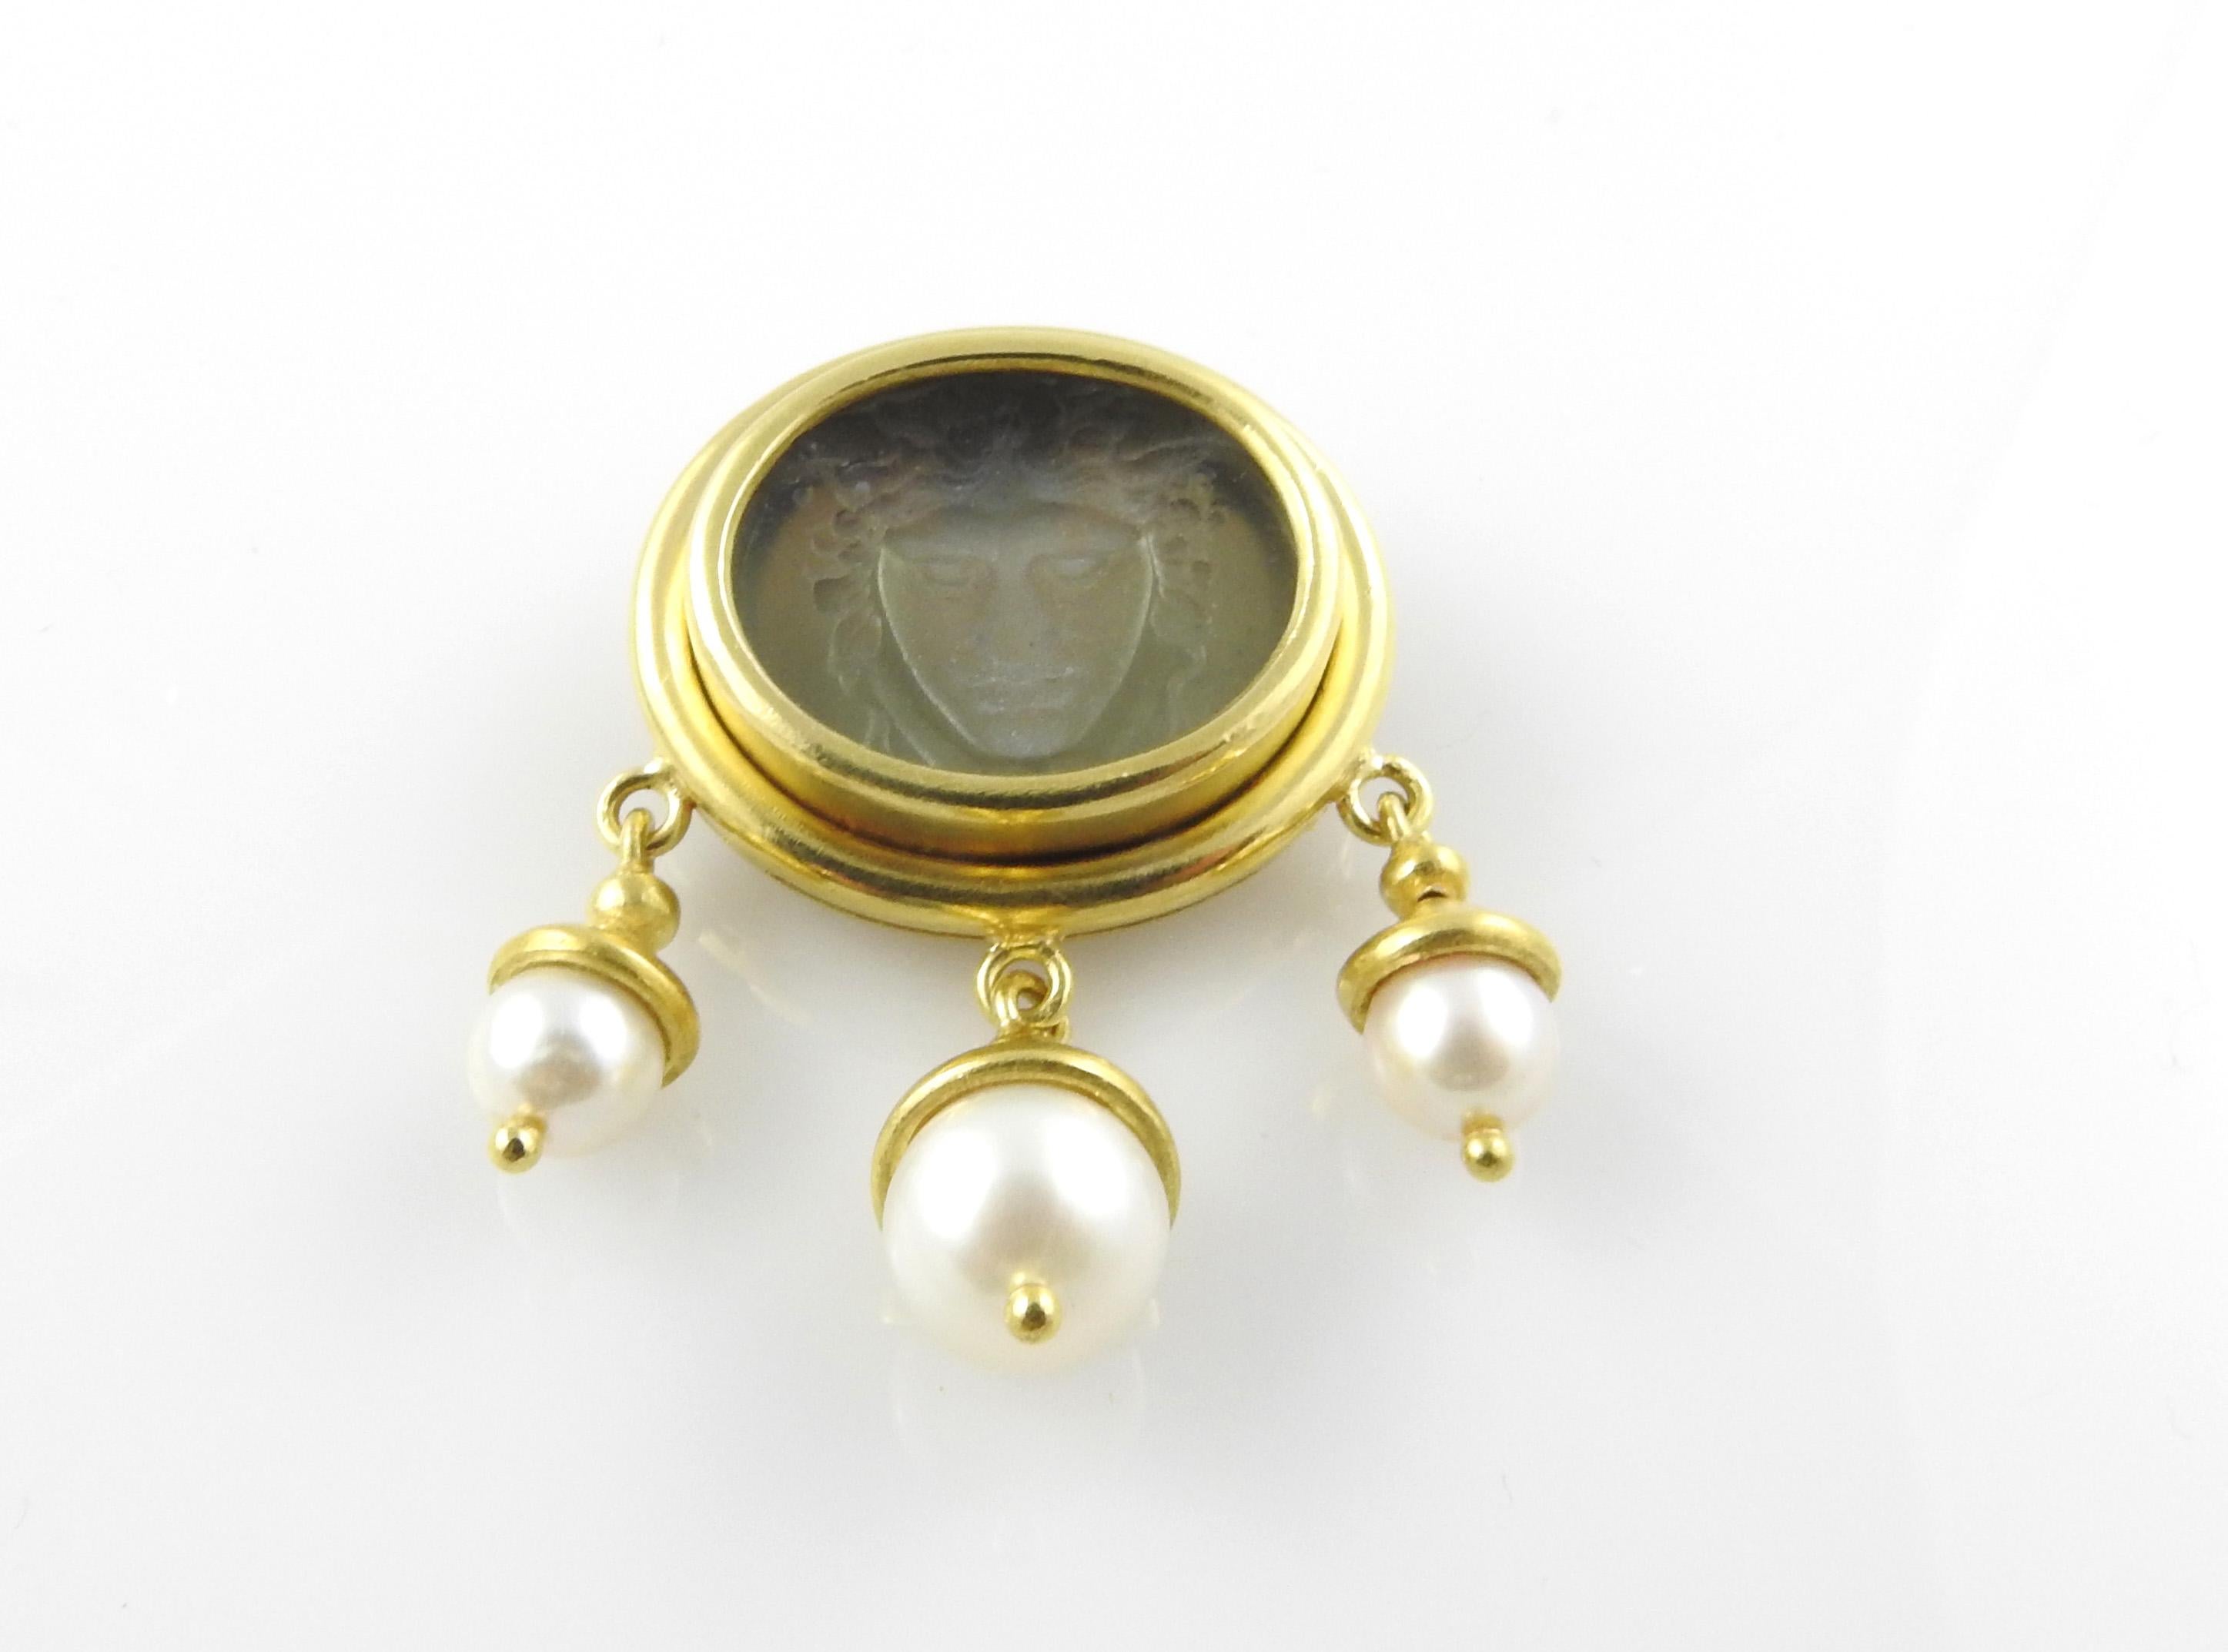 Elizabeth Locke 18K Yellow Gold Green Venetian Glass Pearl Intaglio Brooch / Pendant

This beautiful piece can be worn as a brooch or a pendant.

The oval brooch / pendant is set with an oval intaglio design of a goddess set in Venetian green glass.